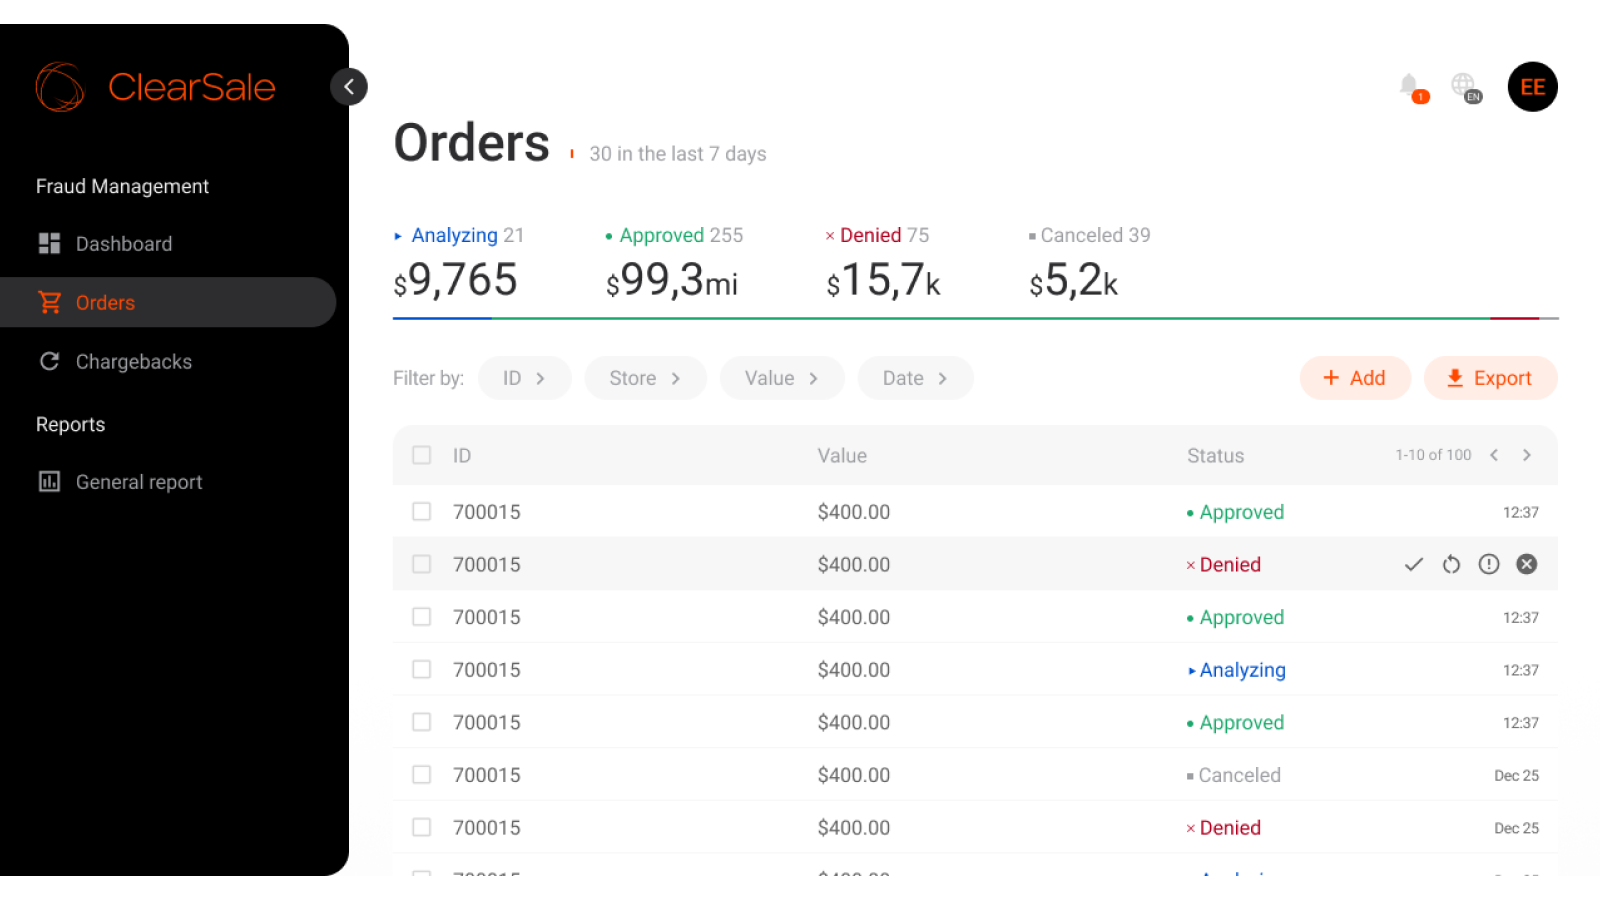  View specific details of an order and the customer behaviour.